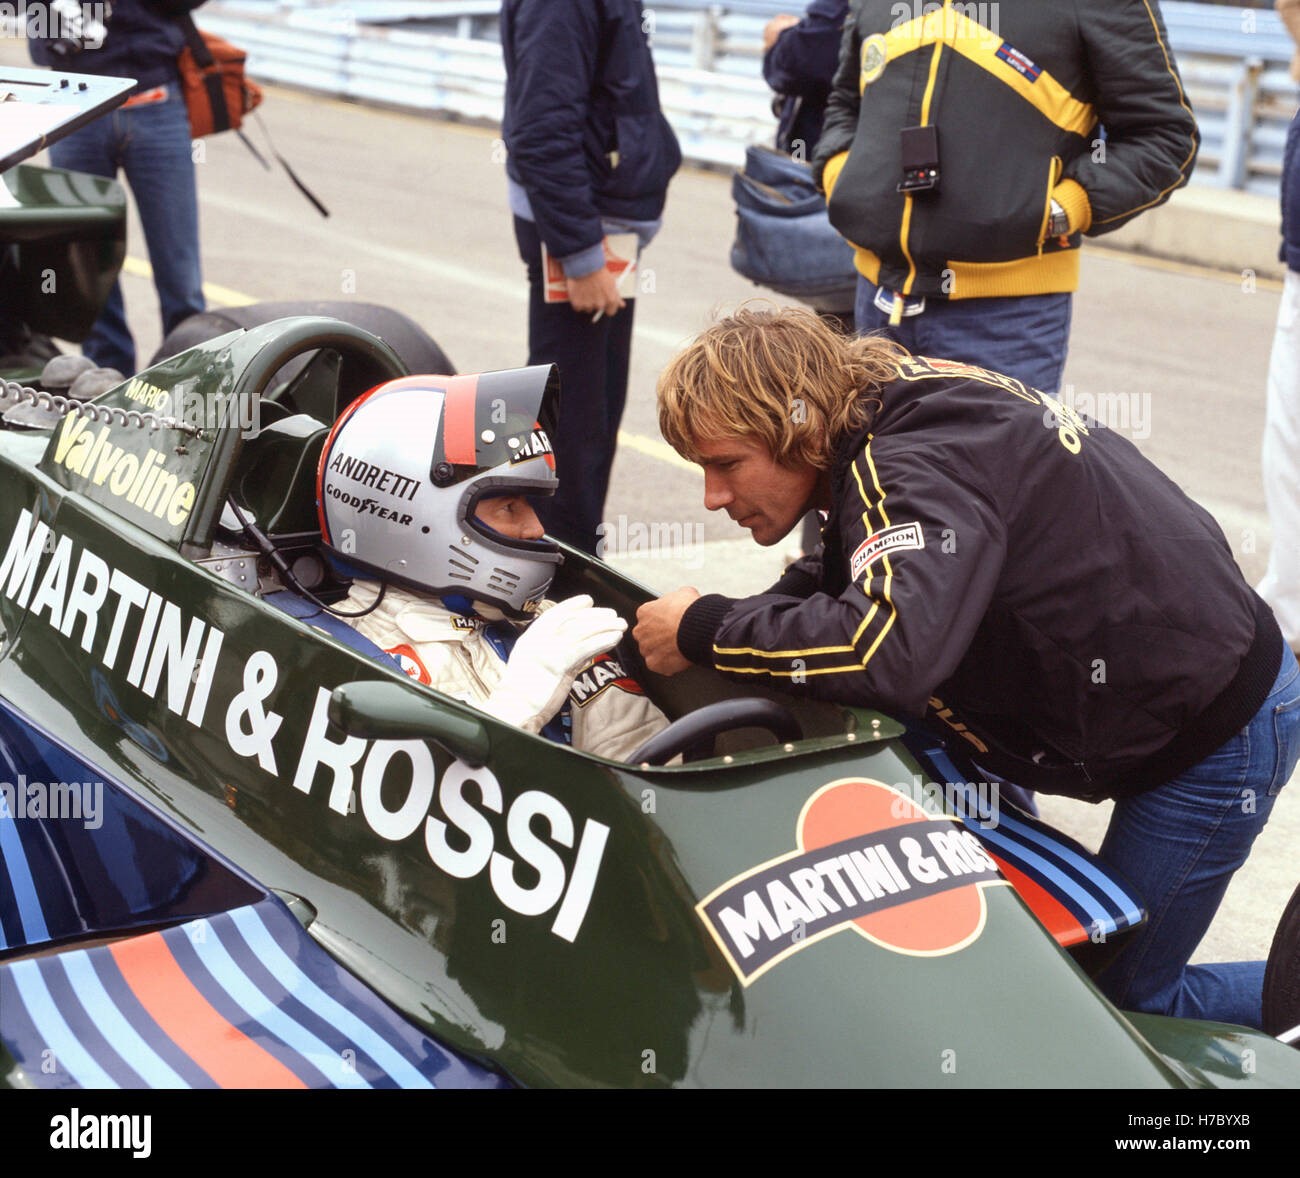 James Hunt and Mario Andretti at the US Grand Prix East in Watkins Glen on 07 October 1979.